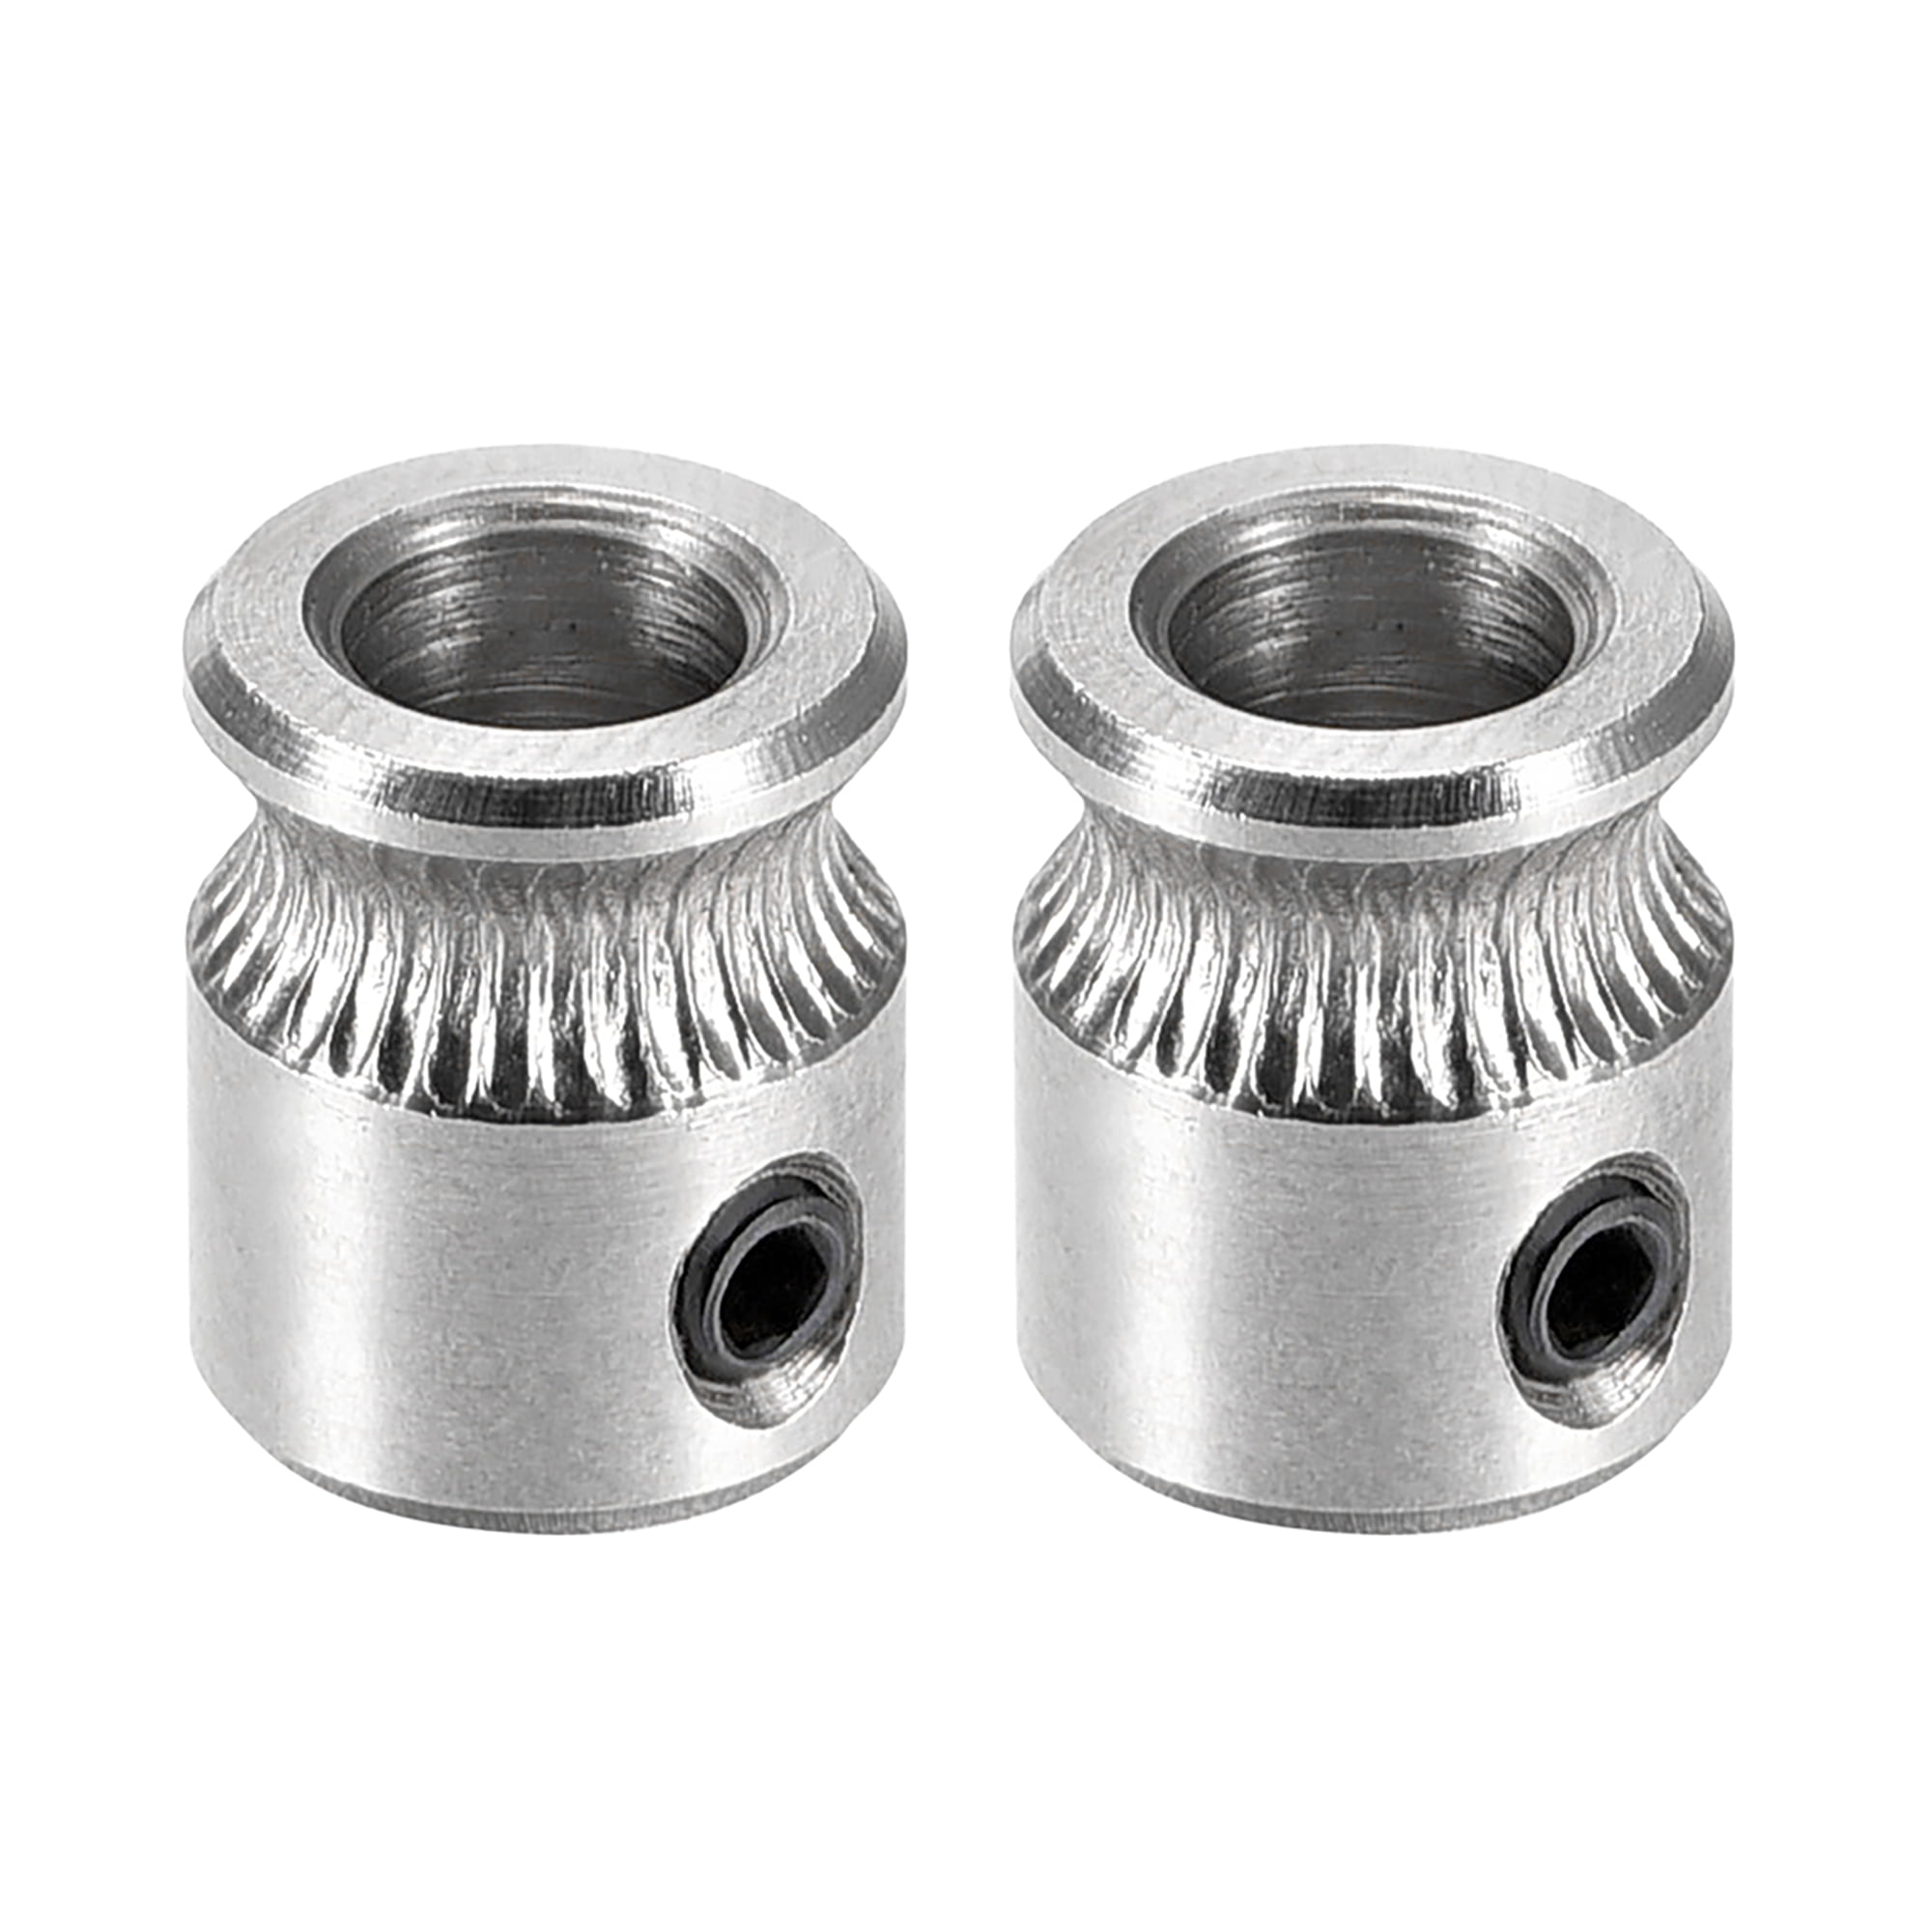 uxcell MK8 Drive Gear Direct Extruder Drive 5mm Bore for Reprap Extruder 2pcs